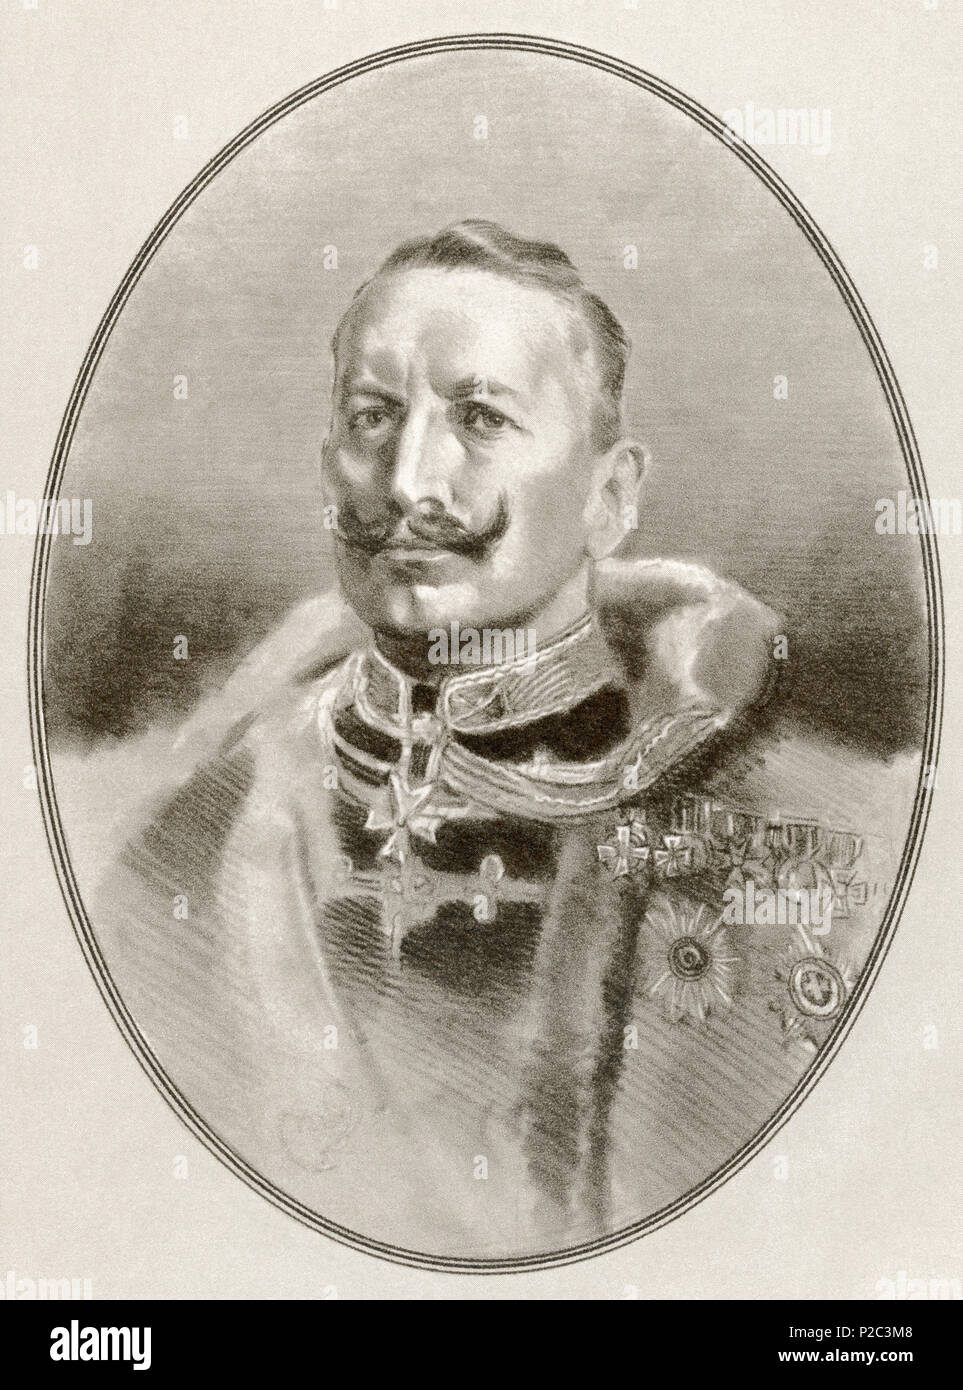 Wilhelm II, 1859 – 1941.  Last German Emperor (Kaiser) and King of Prussia.  Illustration by Gordon Ross, American artist and illustrator (1873-1946), from Living Biographies of Famous Rulers. Stock Photo